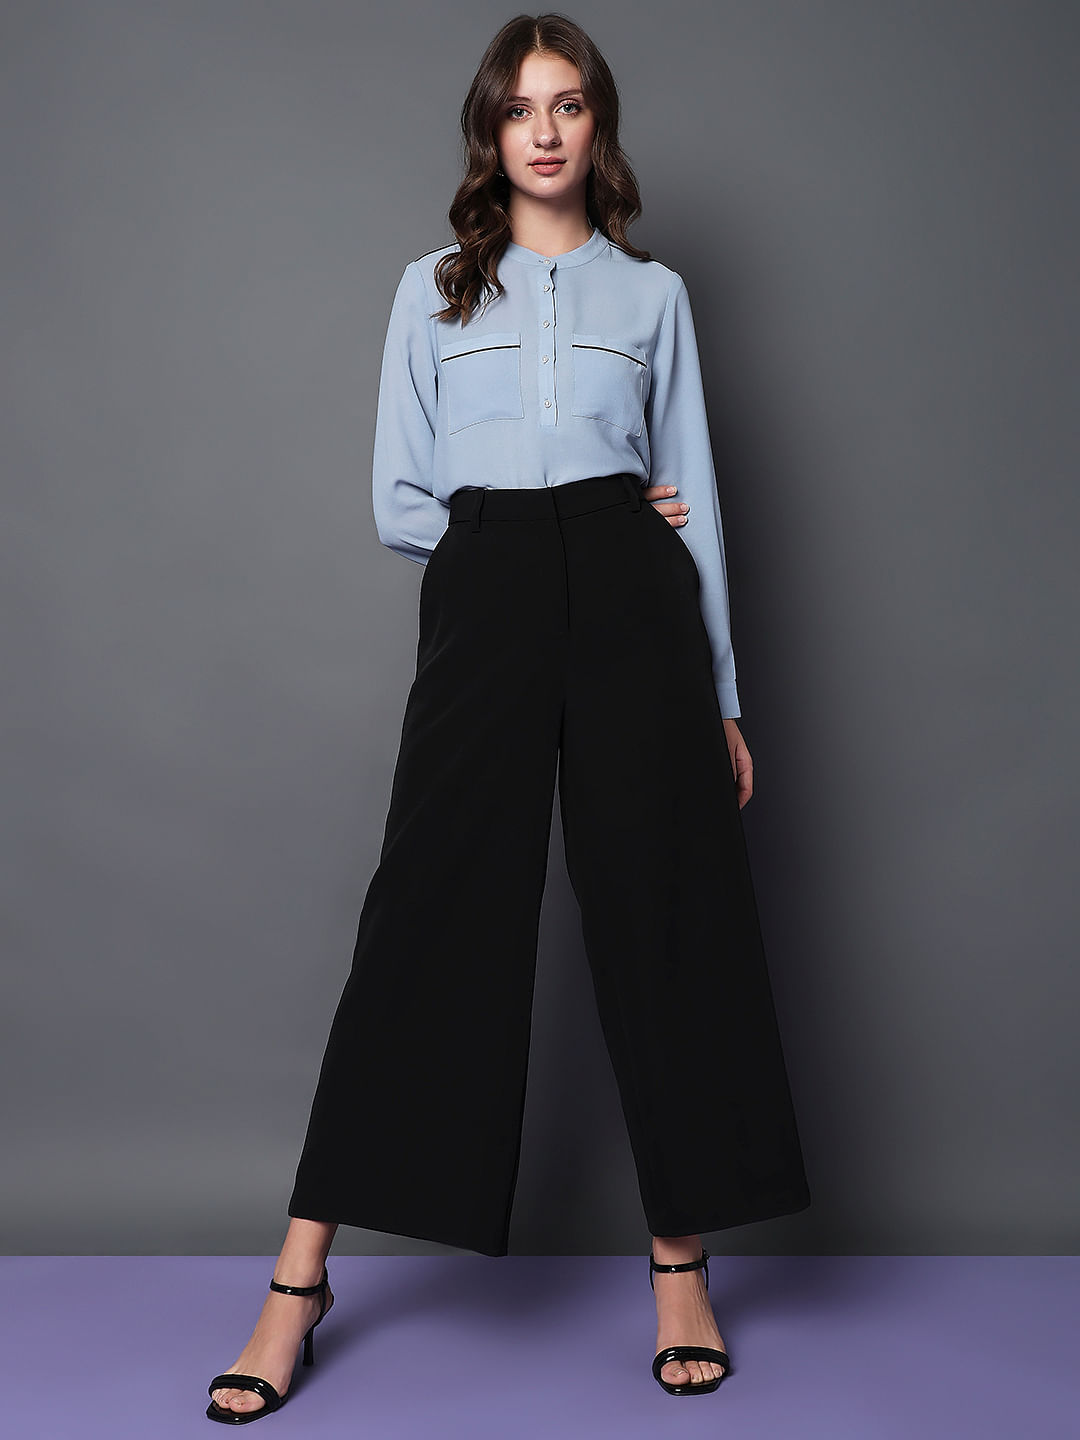 Buy Beige Blue Scooter Palazzo Pant Manipuri Silk for Best Price, Reviews,  Free Shipping